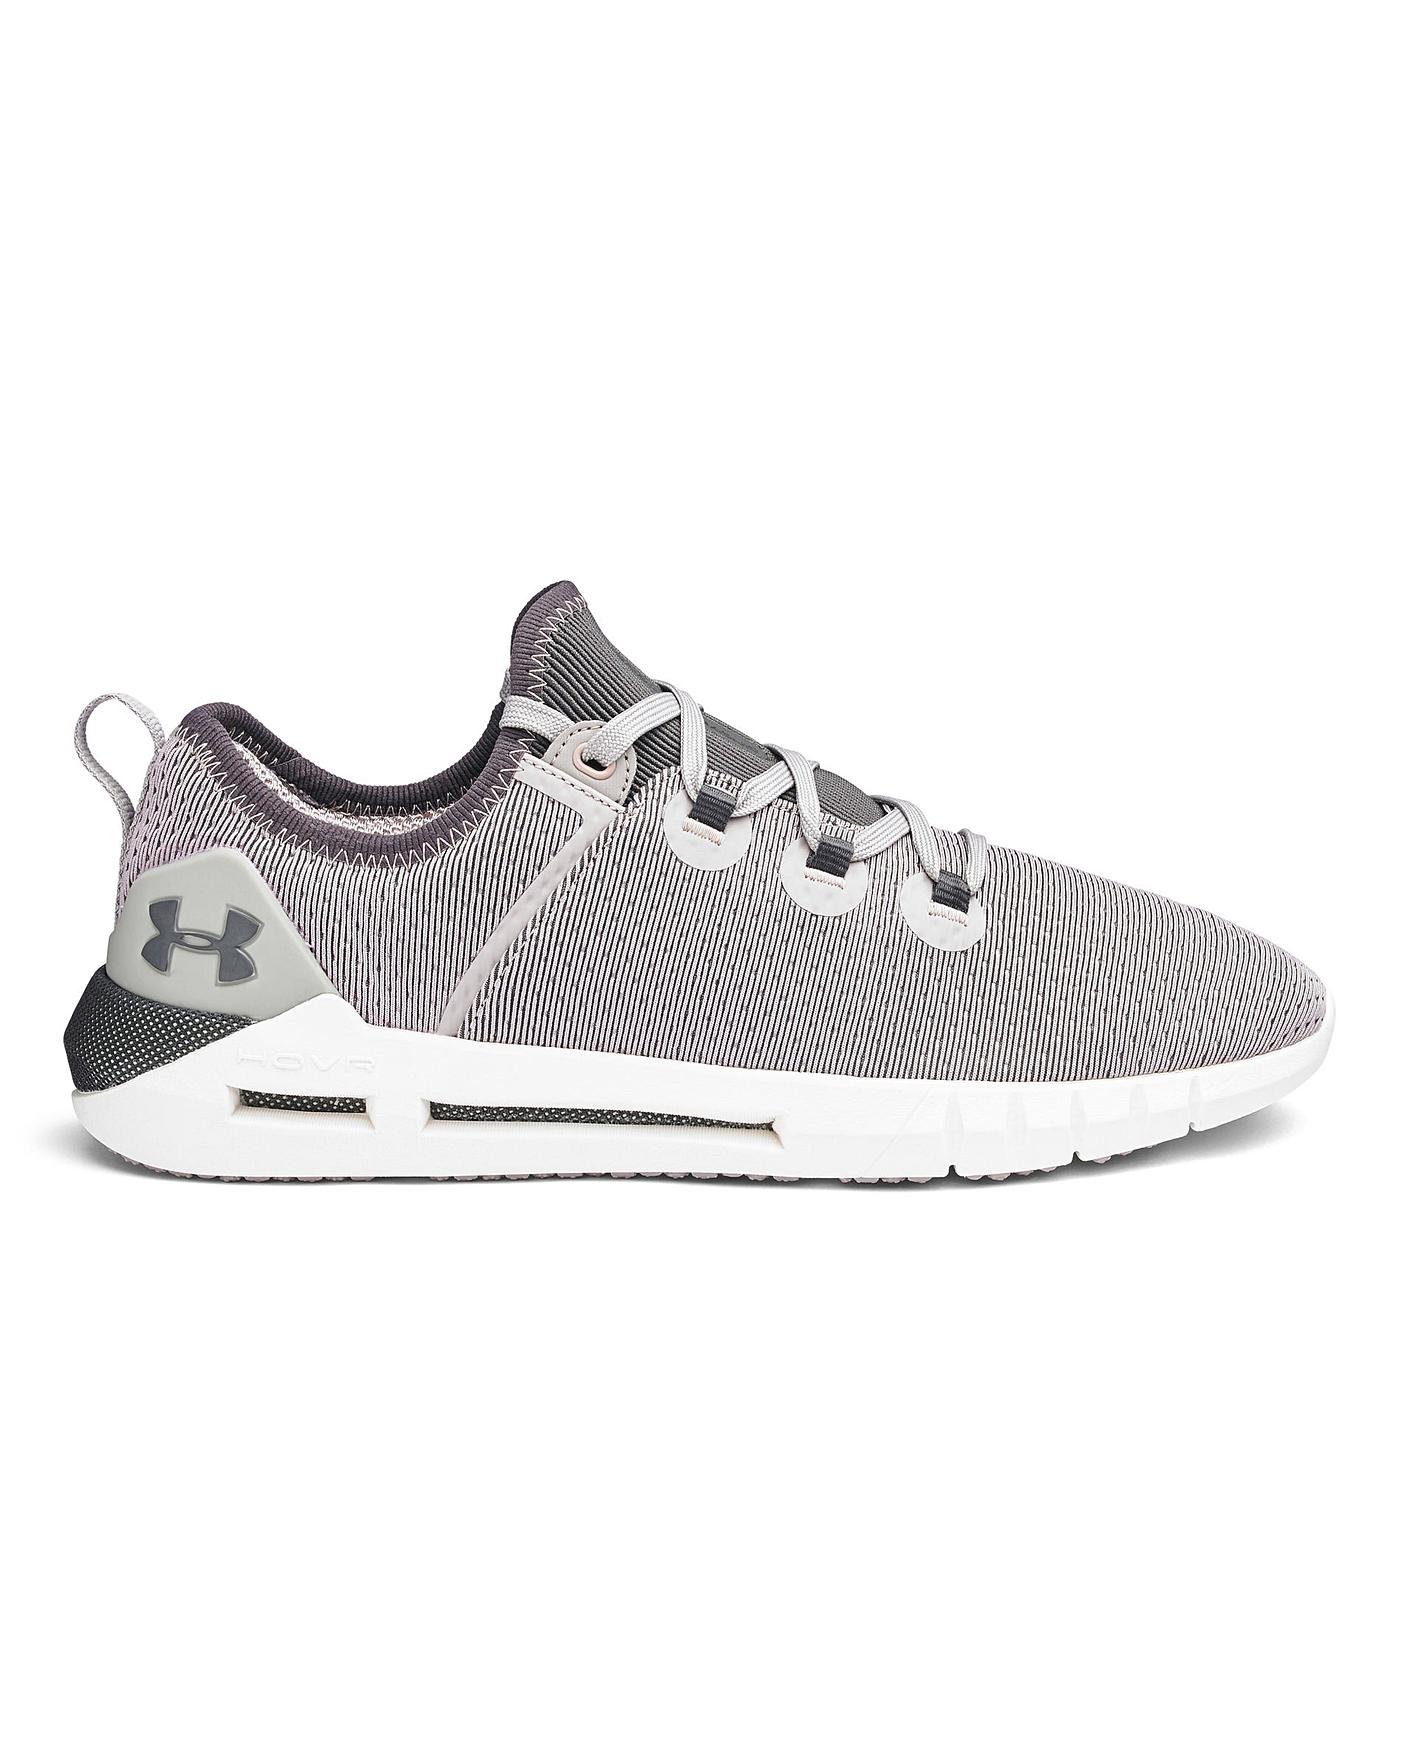 Under Armour Hovr SLK Trainers | Oxendales